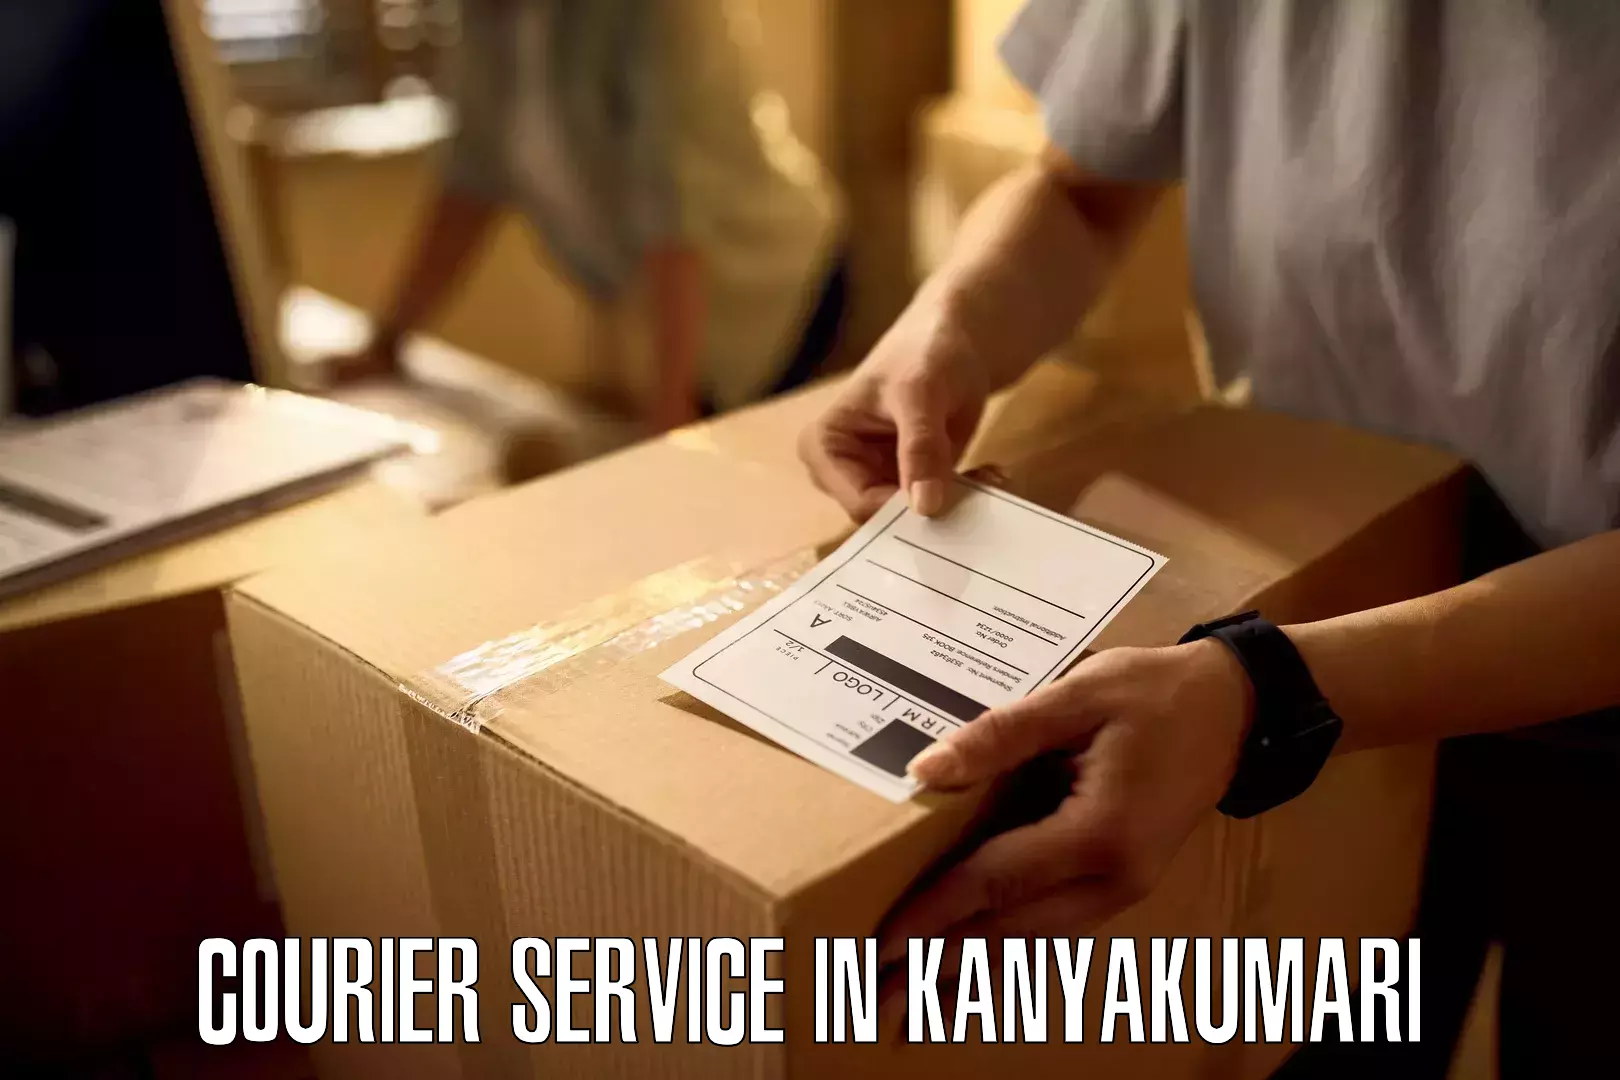 Postal and courier services in Kanyakumari